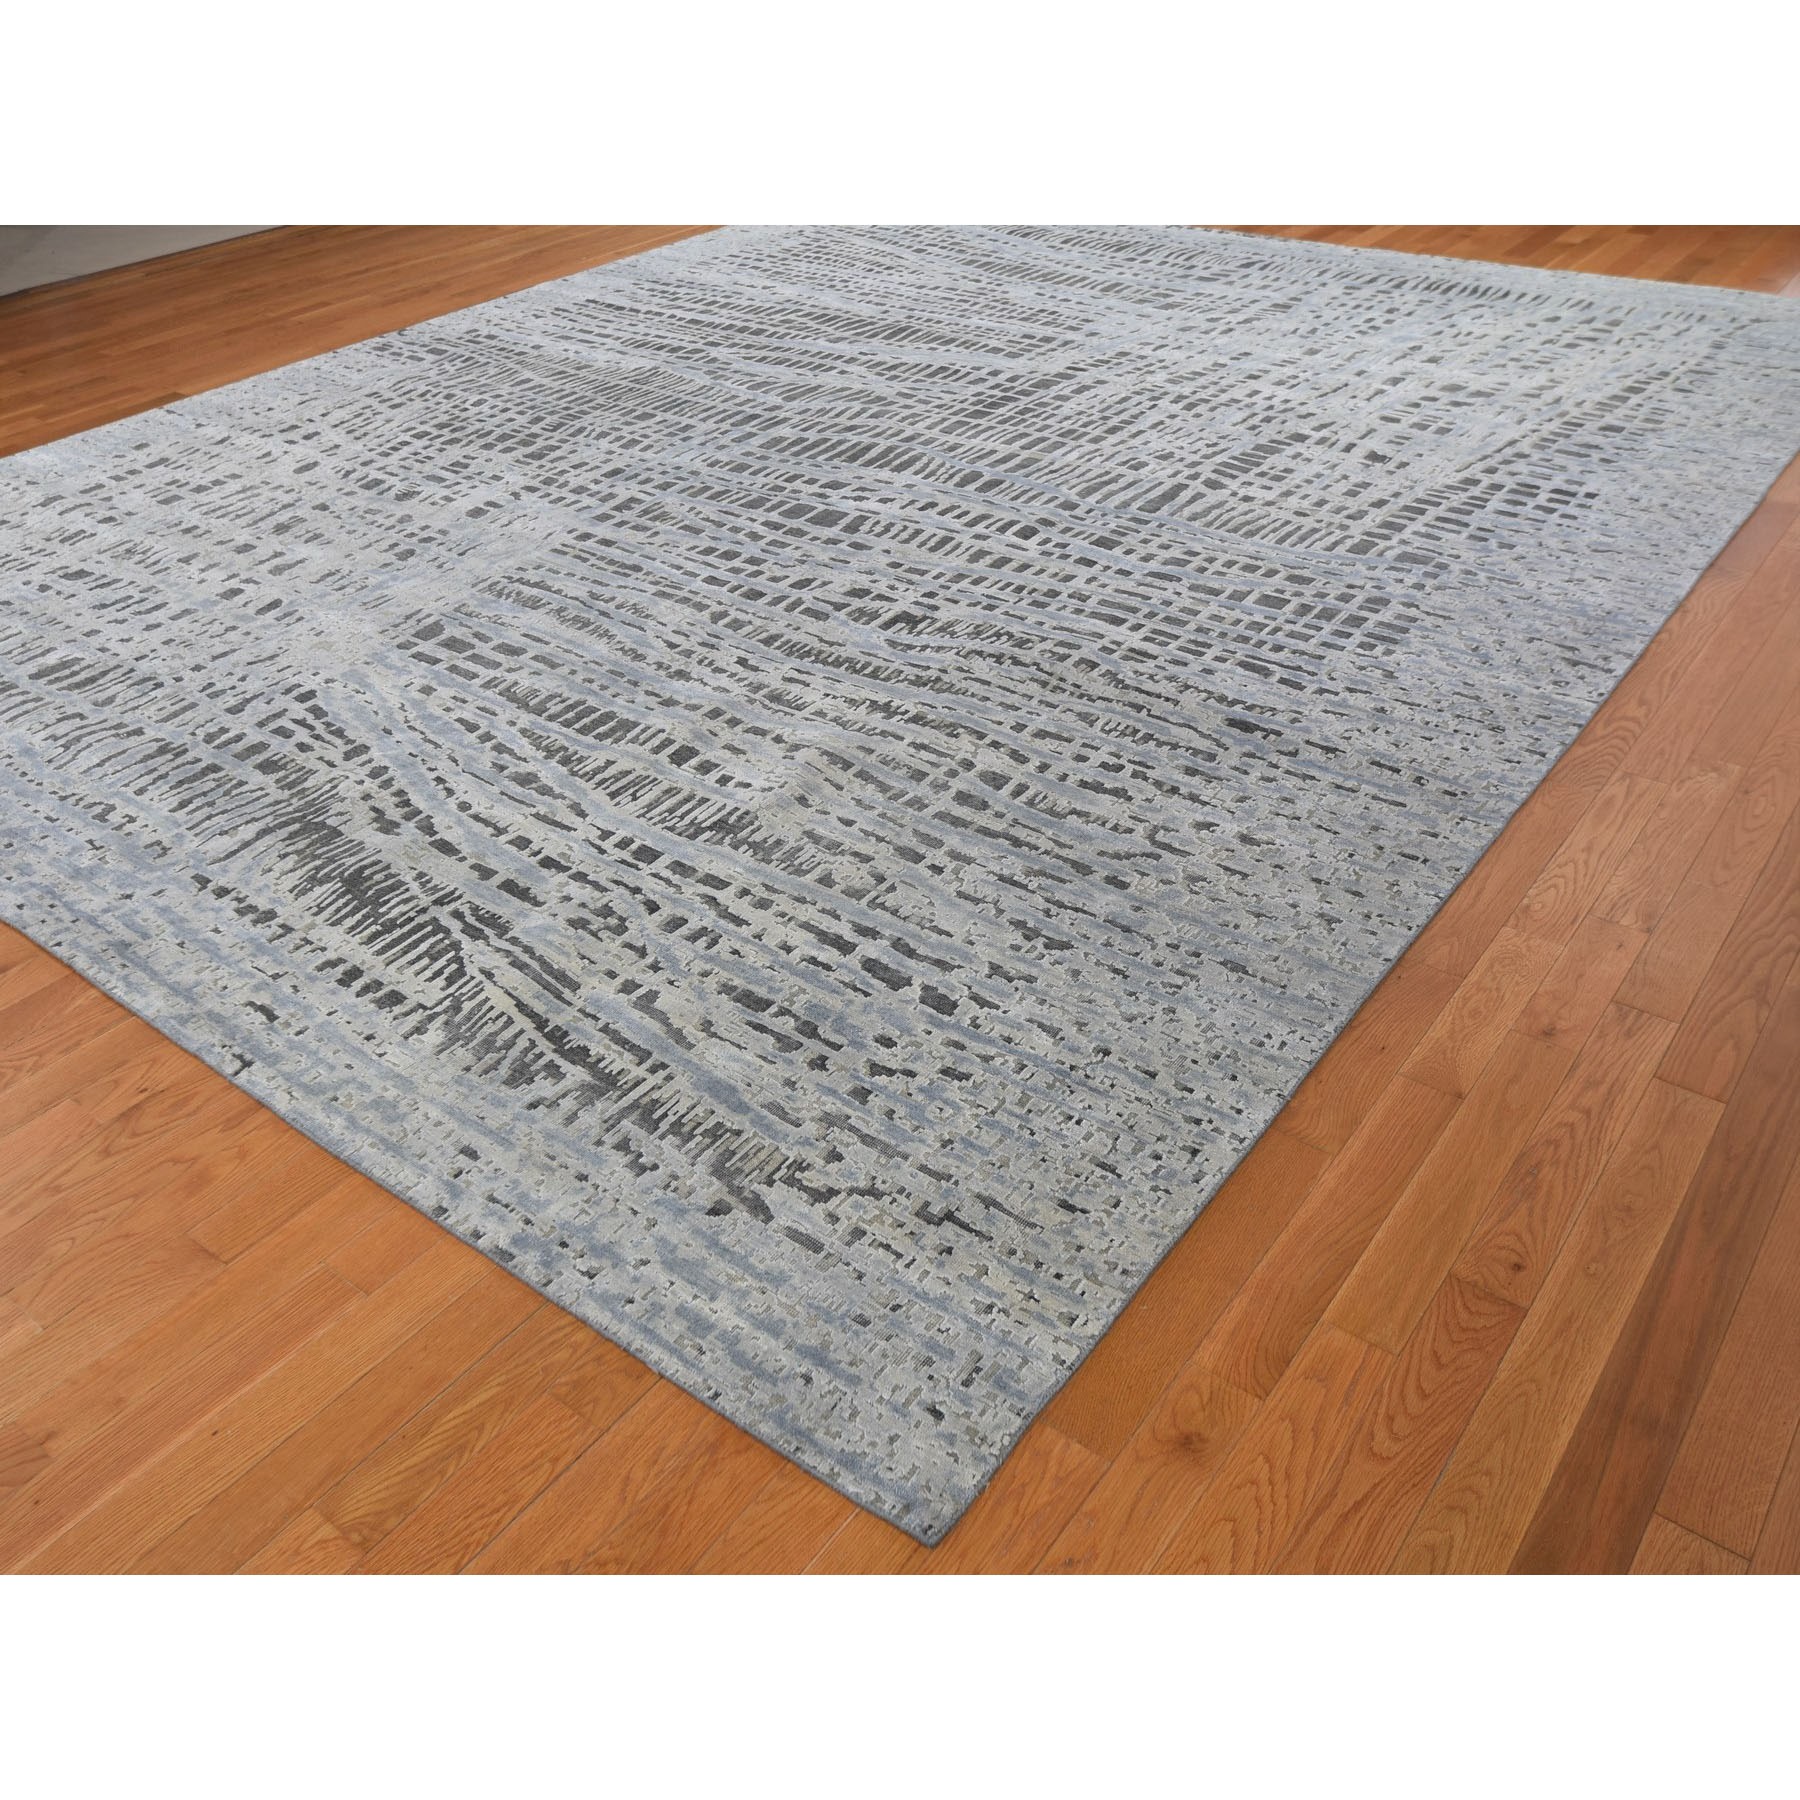 12-2 x15-4  THE LOST BRANCHES, Oversized Silk With Textured Wool Hand Knotted Oriental Rug 